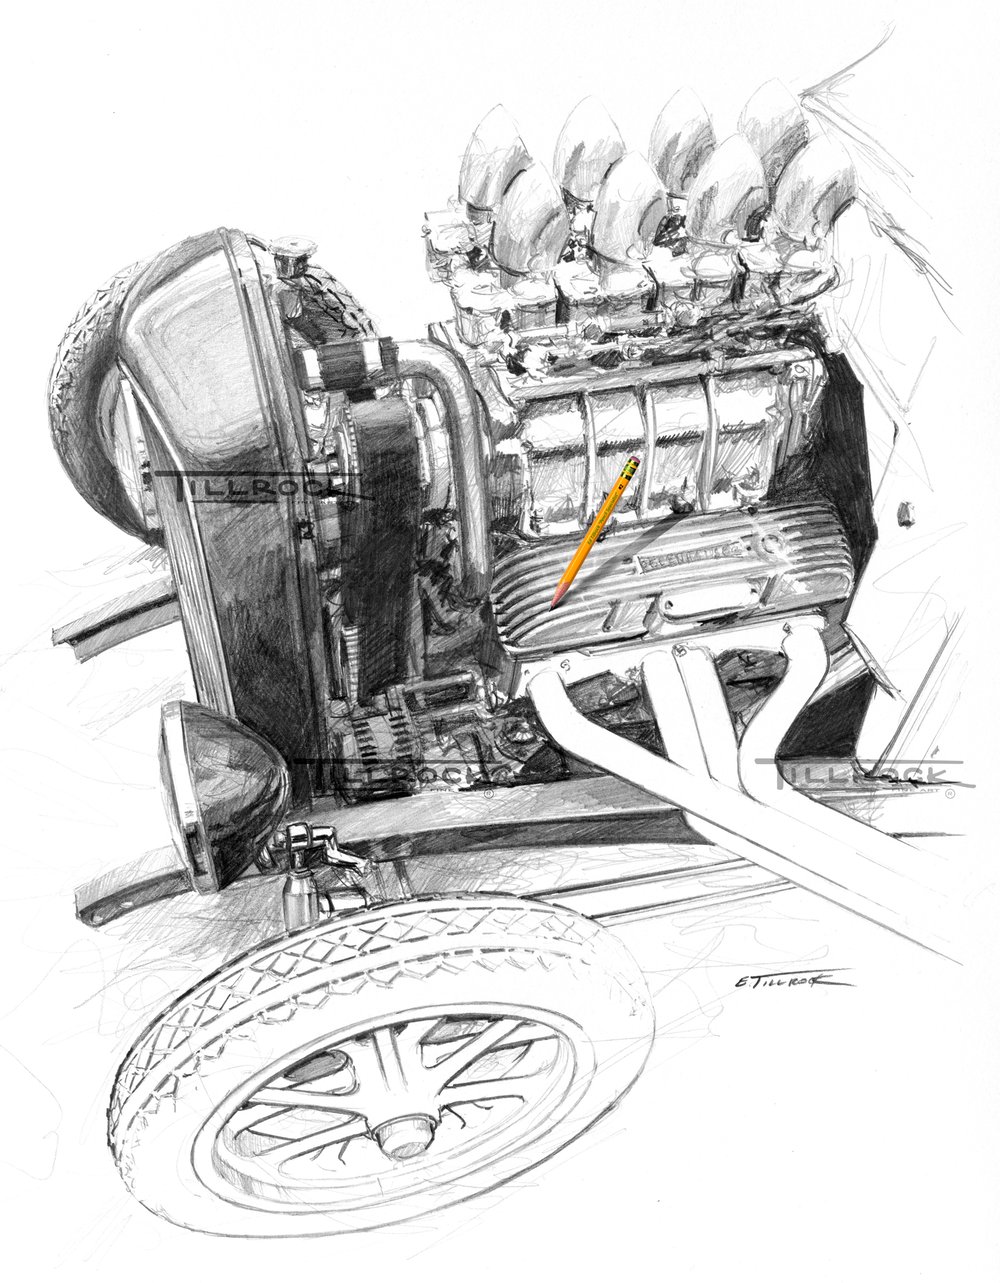 Image of "Super Charged Model A"